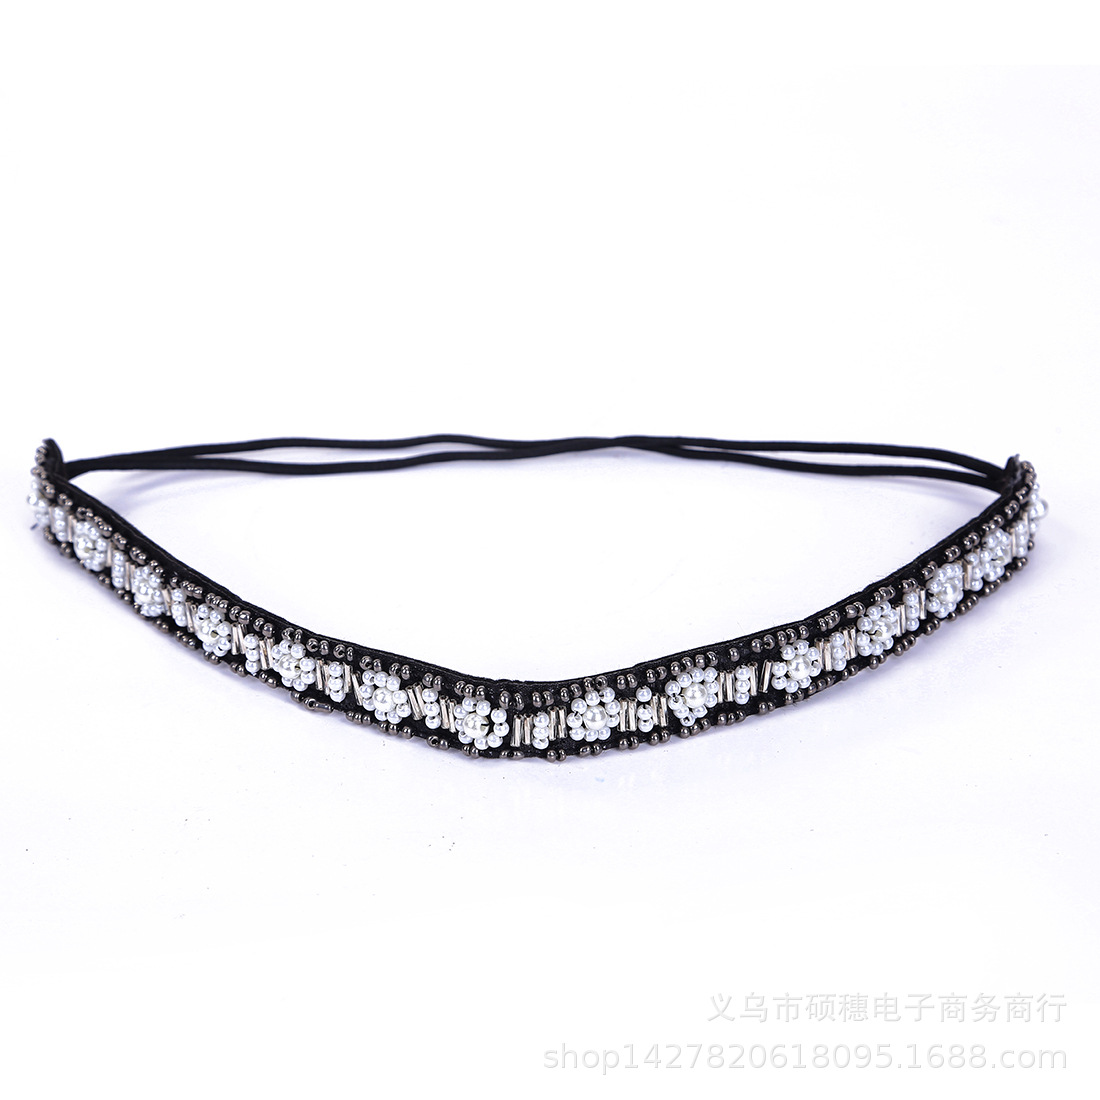 European and American Stylish Hair Accessories Beaded Sewing Bead Hairband Headband Cross-Border E-Commerce in Stock for a Long Time